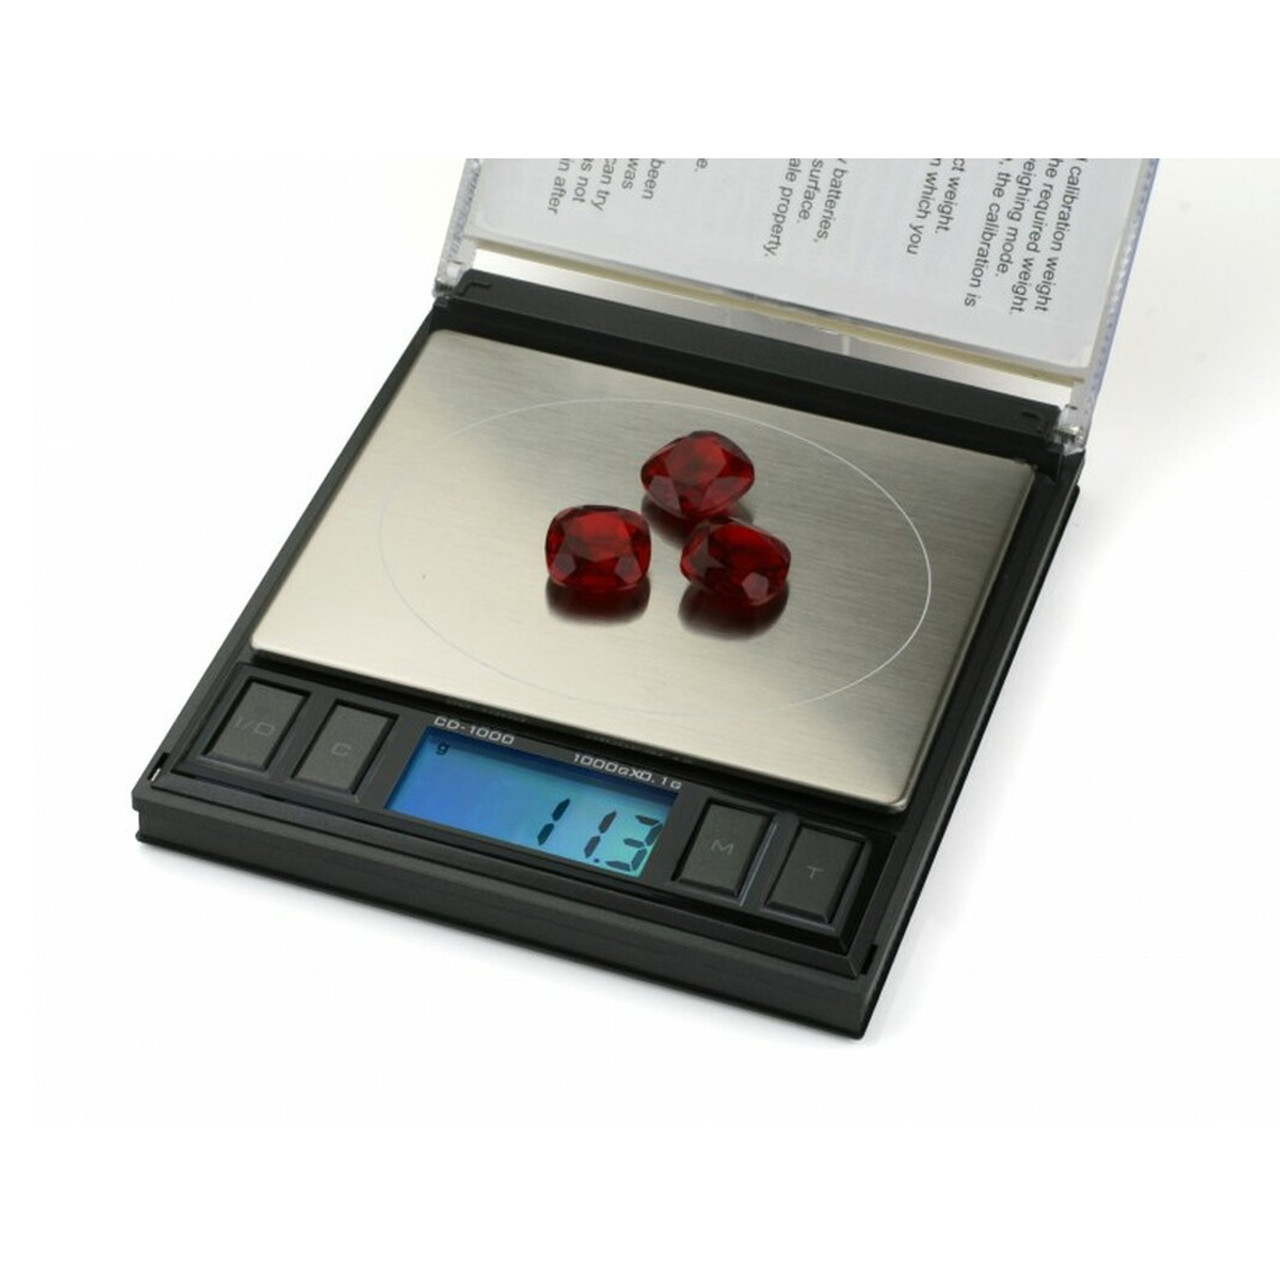 AMW-1000 COMPACT DIGITAL BENCH SCALE, 1KG X 0.1G